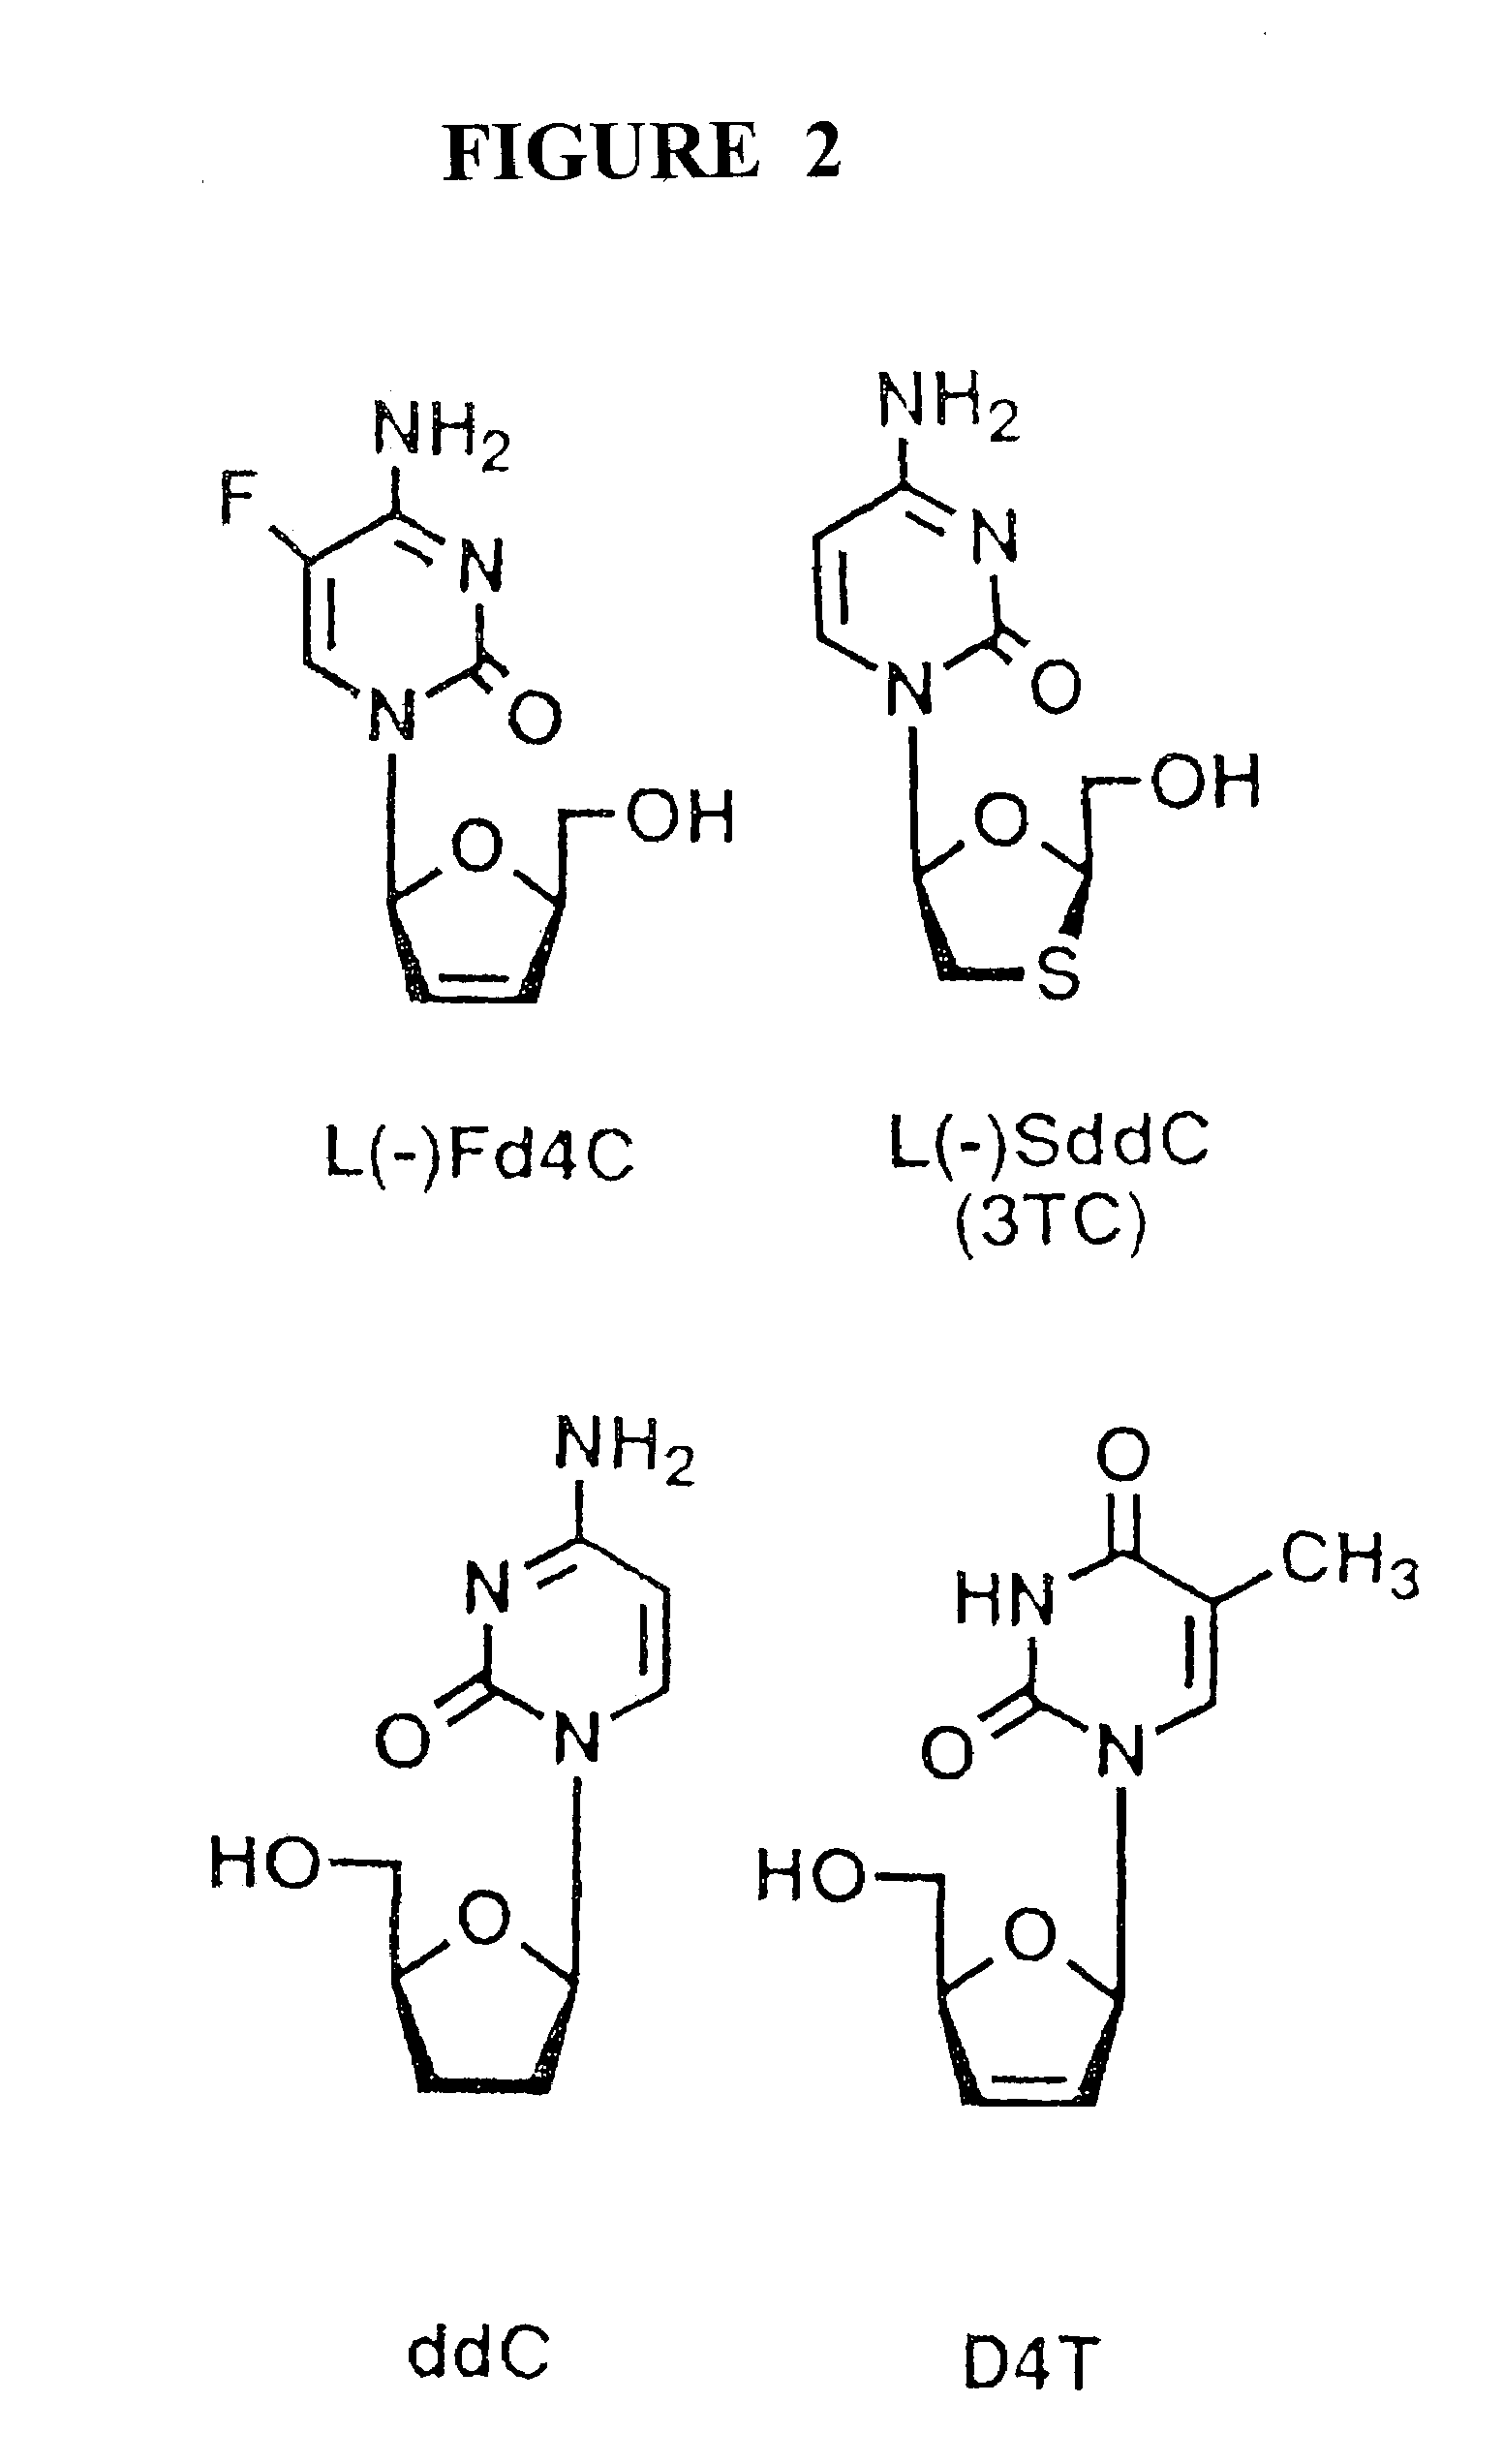 Anti-viral nucleoside analogs and methods for treating viral infections, especially HIV infections